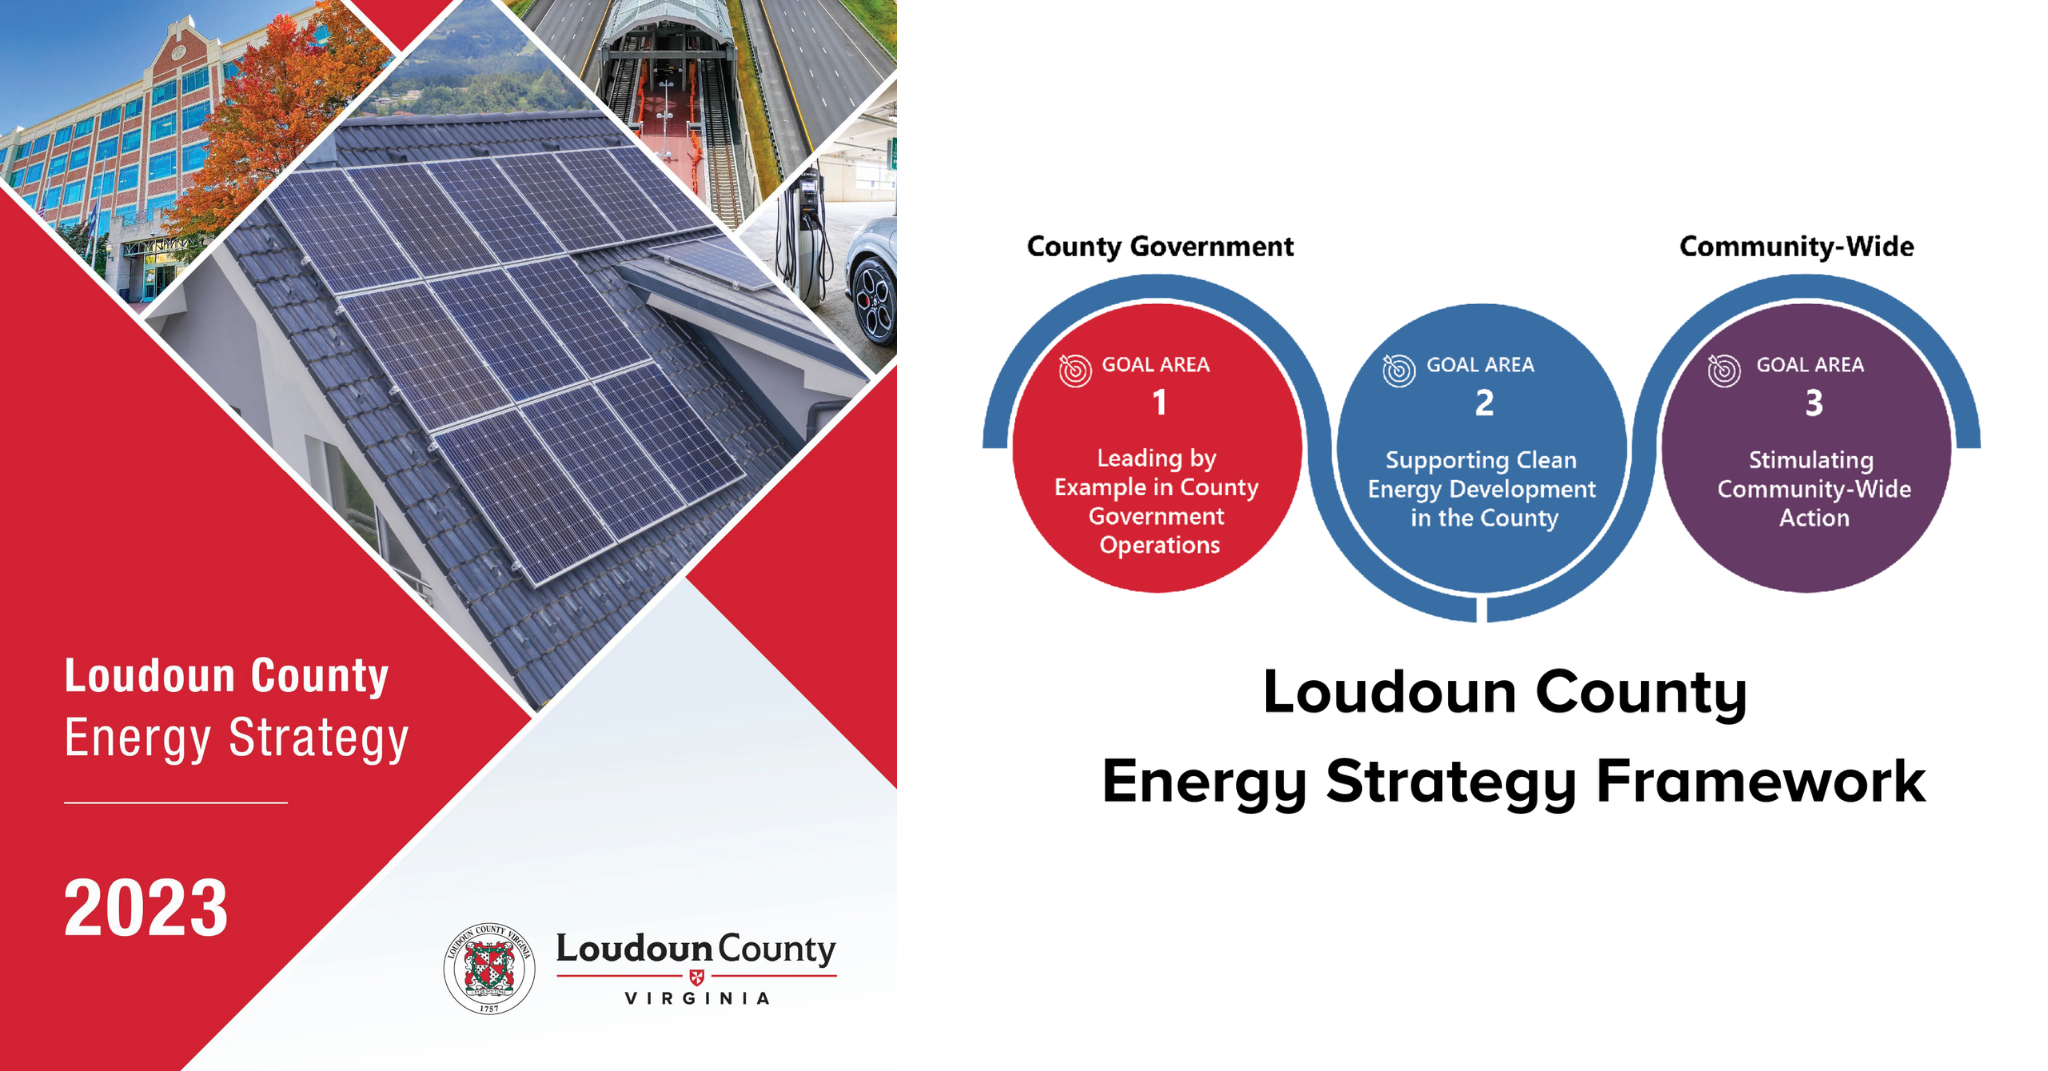 Link to energy strategy document